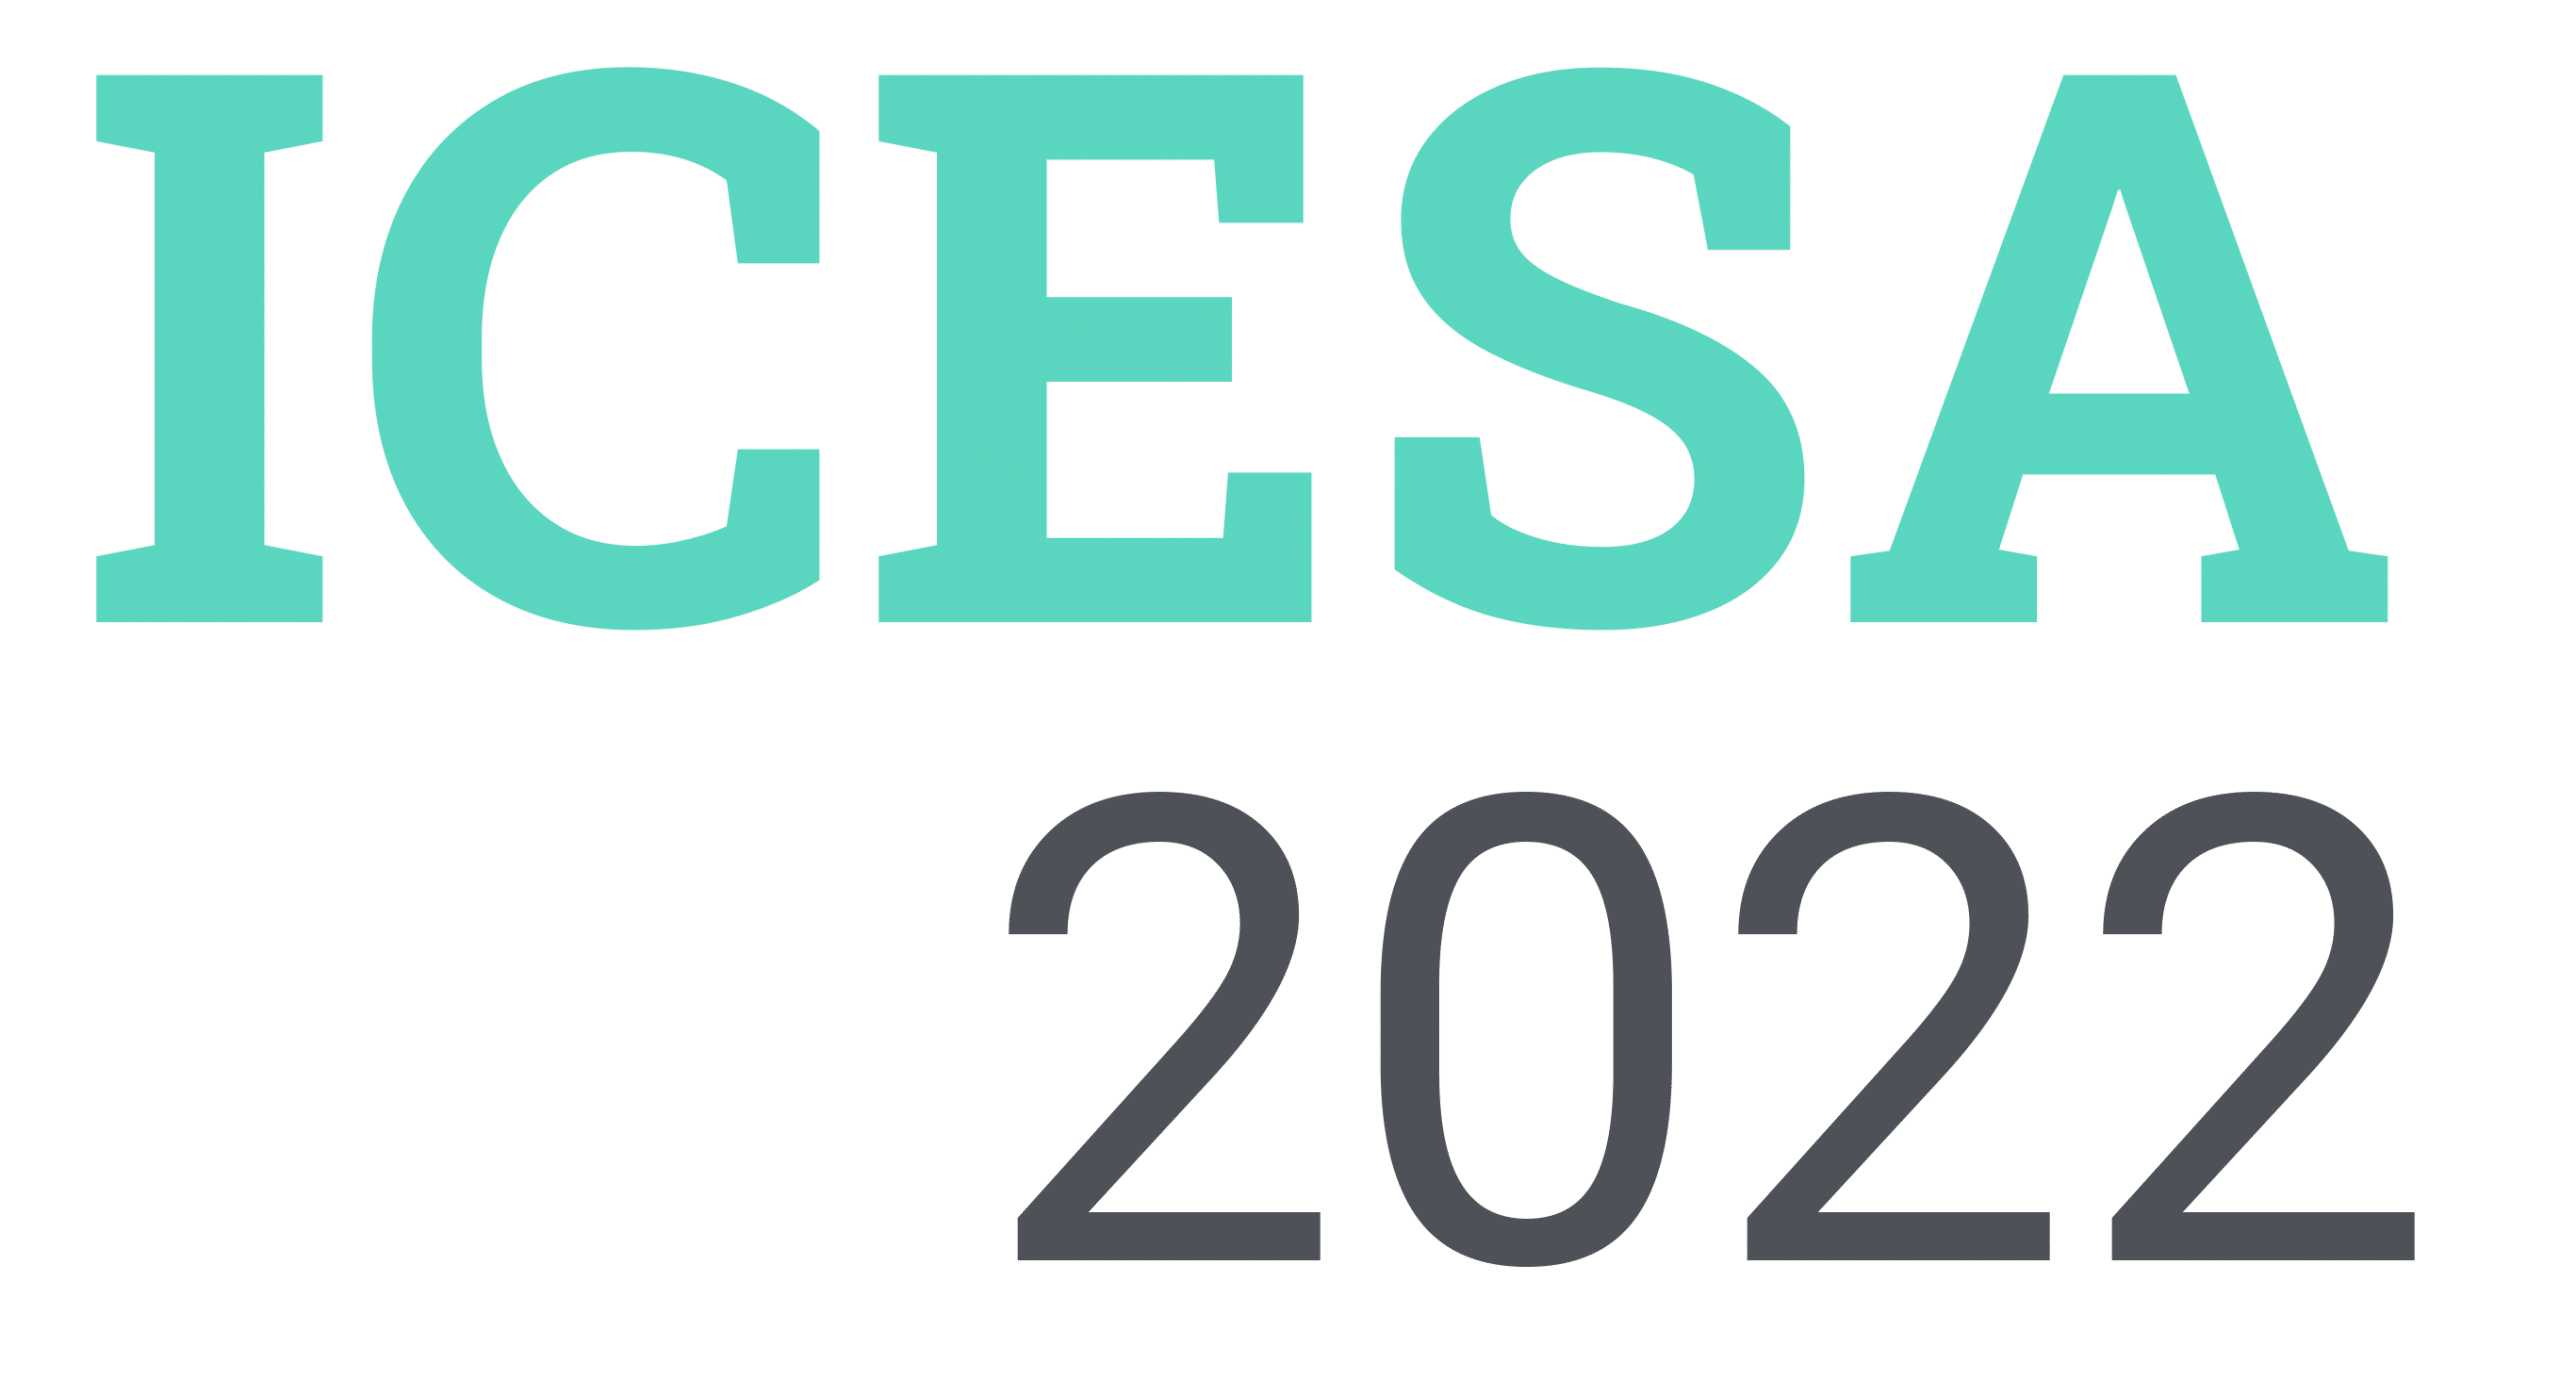 3rd International Conference on Environmental Science and Applications (ICESA’22)